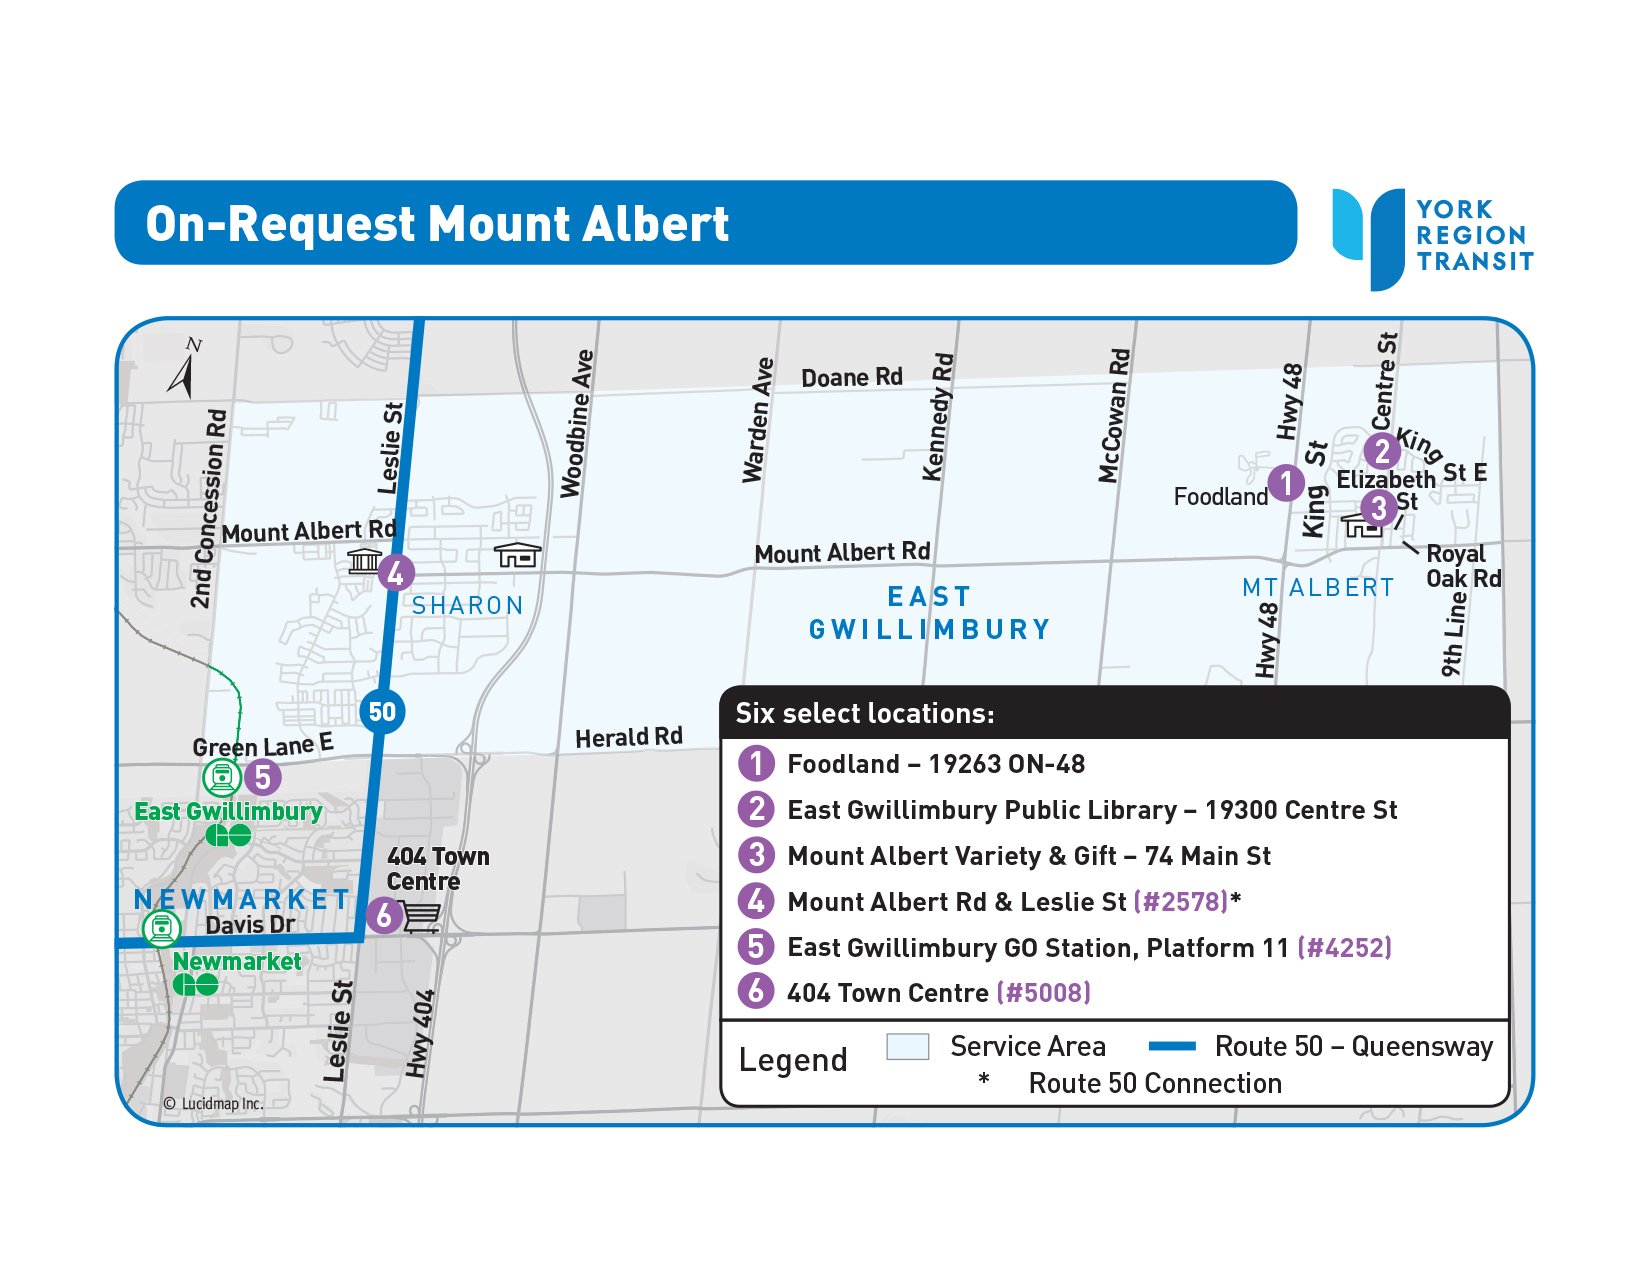 On-Request Mount Albert service area map